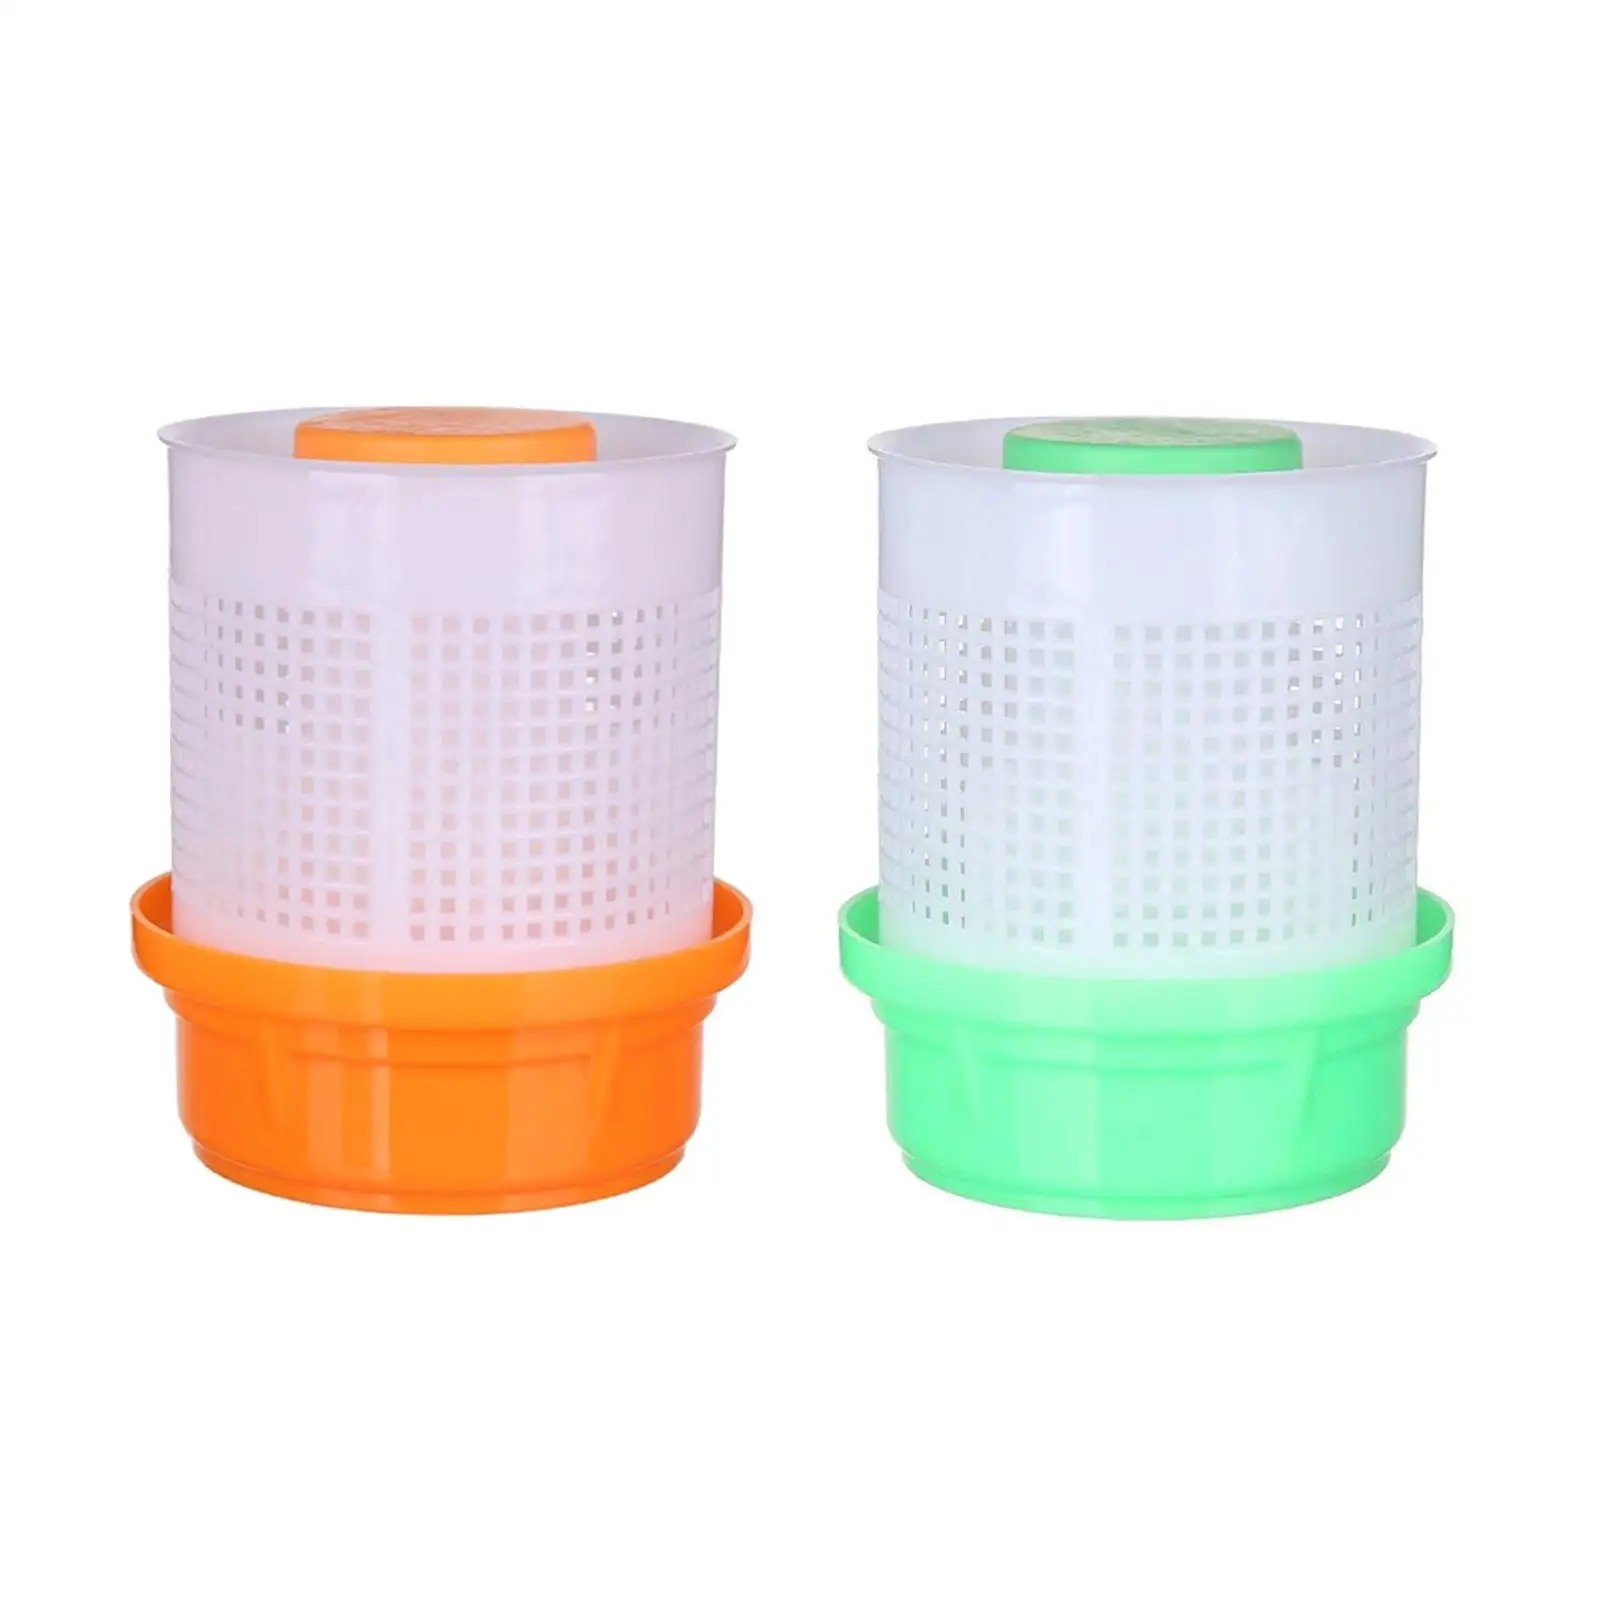 

Vegetable Stuffing Dehydrator Easy to Clean Practical Multipurpose Strainer for Restaurant Kitchen Household Hotels Supplies